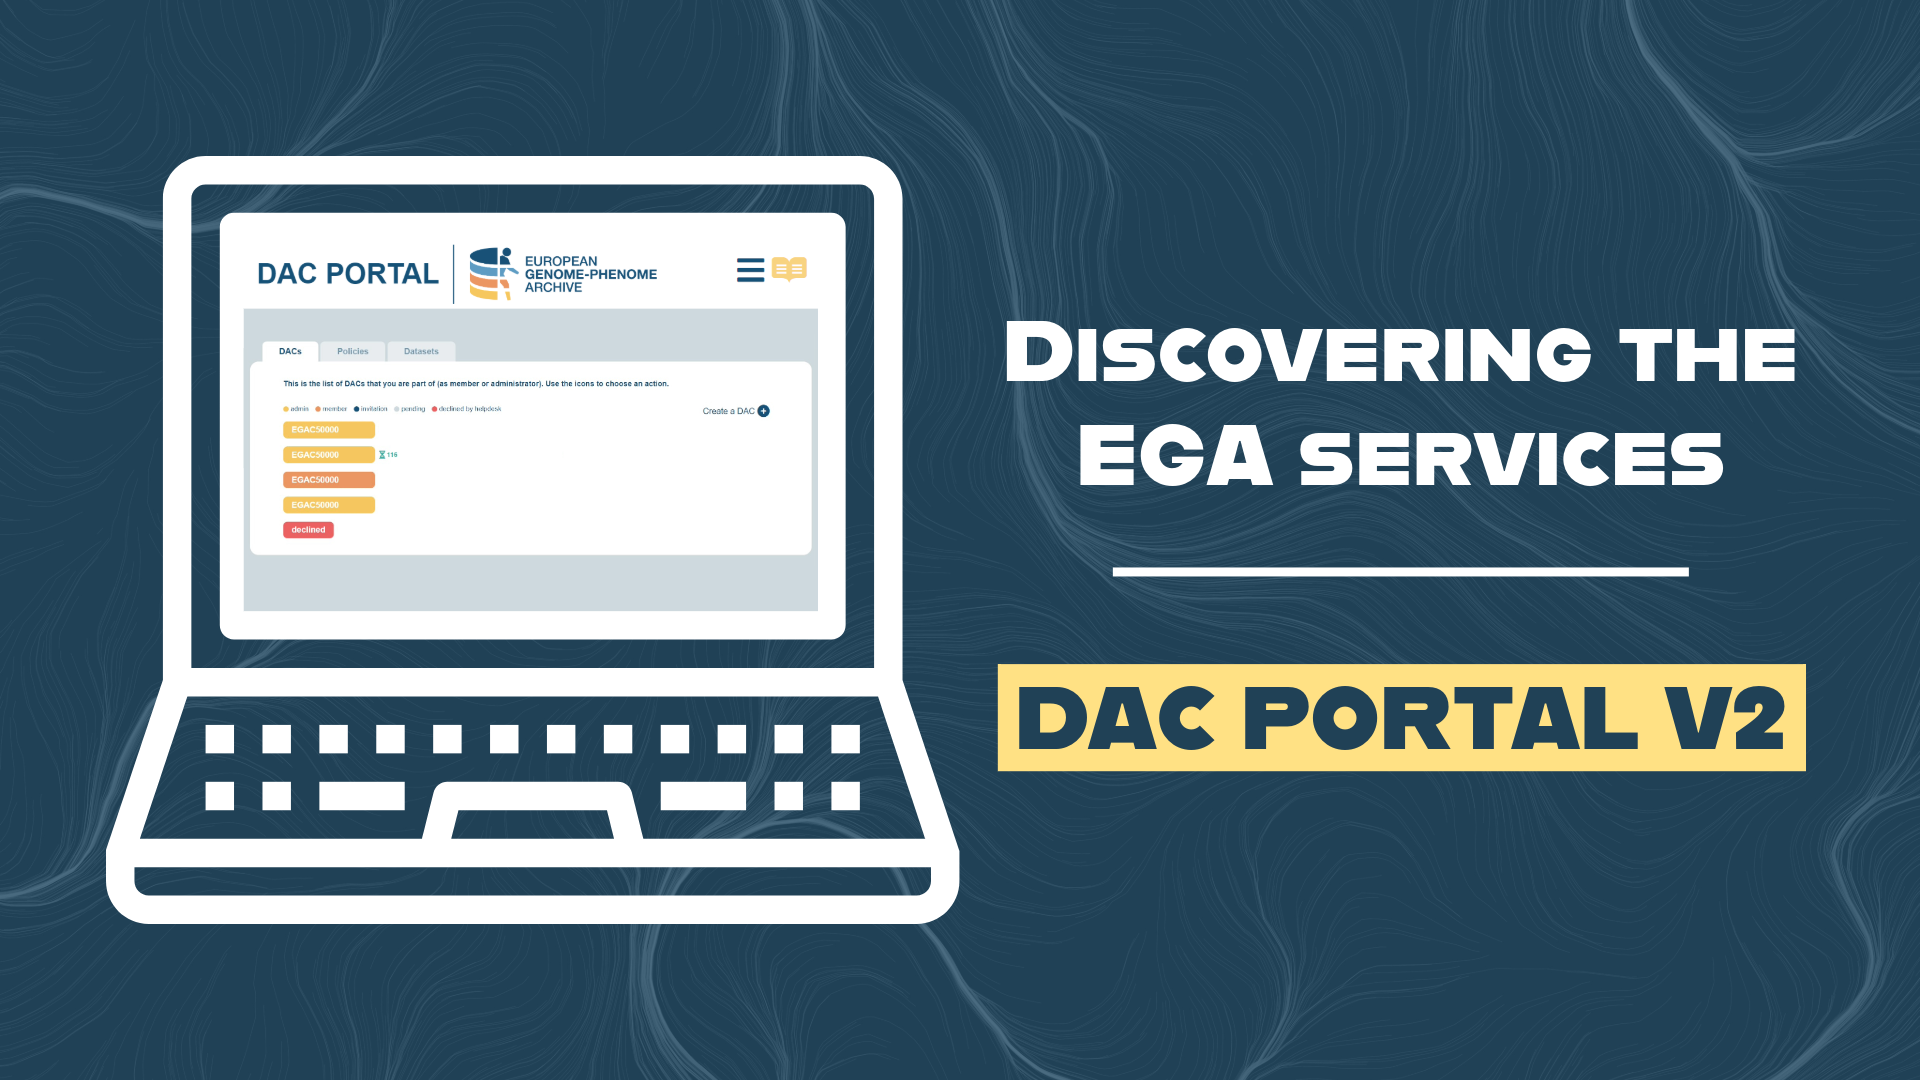 All you need to know about our new DAC Portal v2 main image